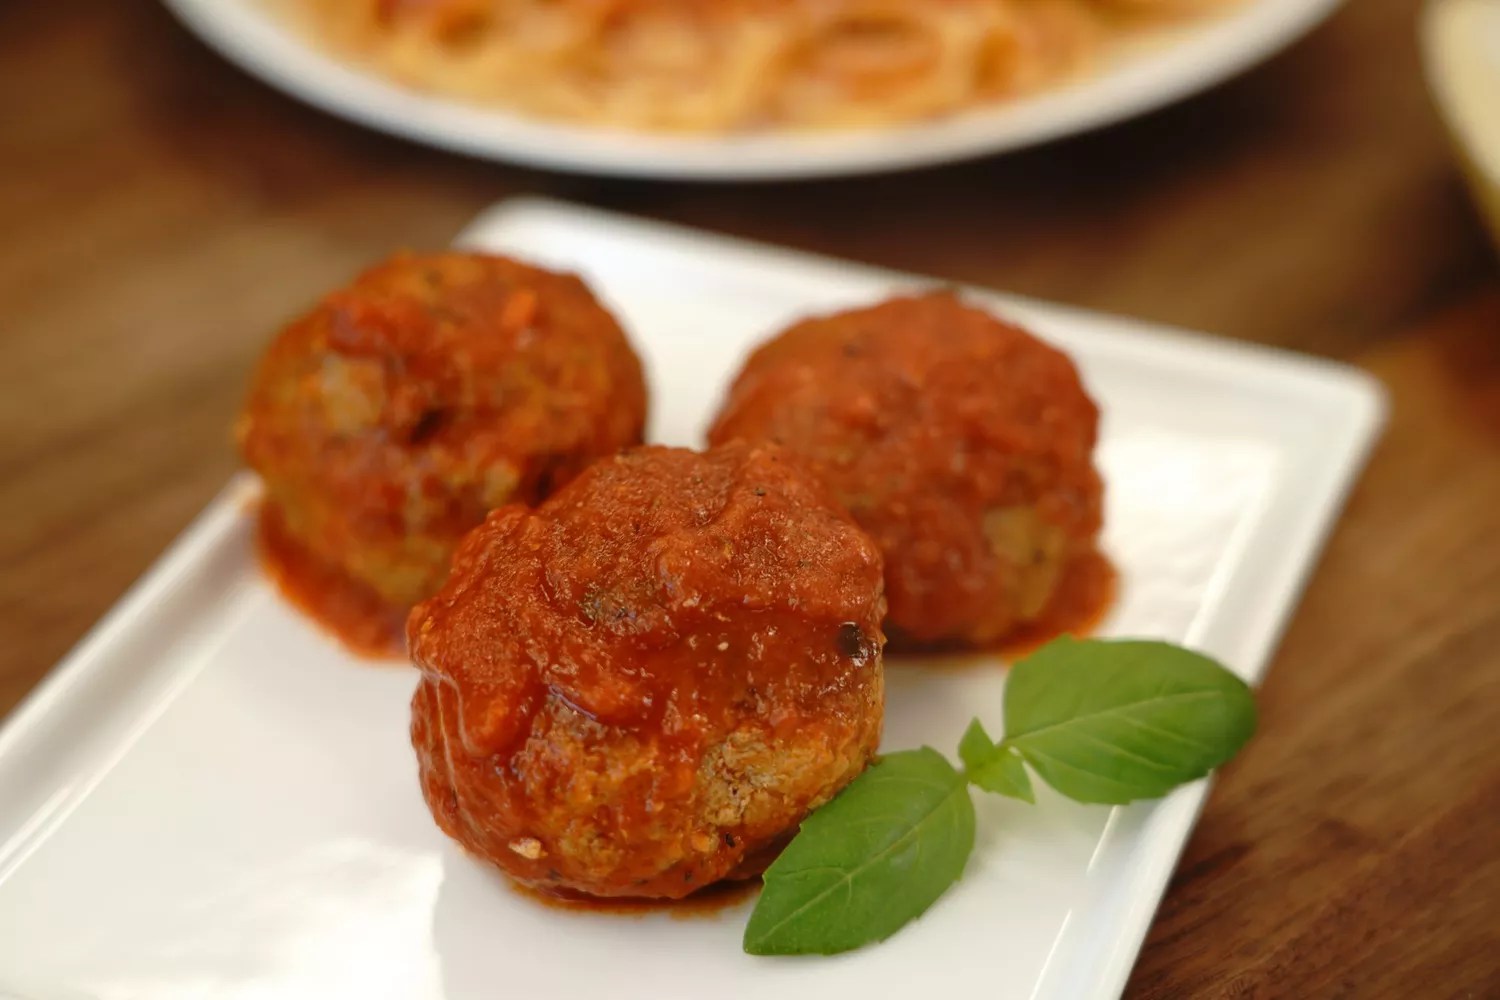 The Juiciest, Most Flavorful Meatballs You’ll Ever Taste